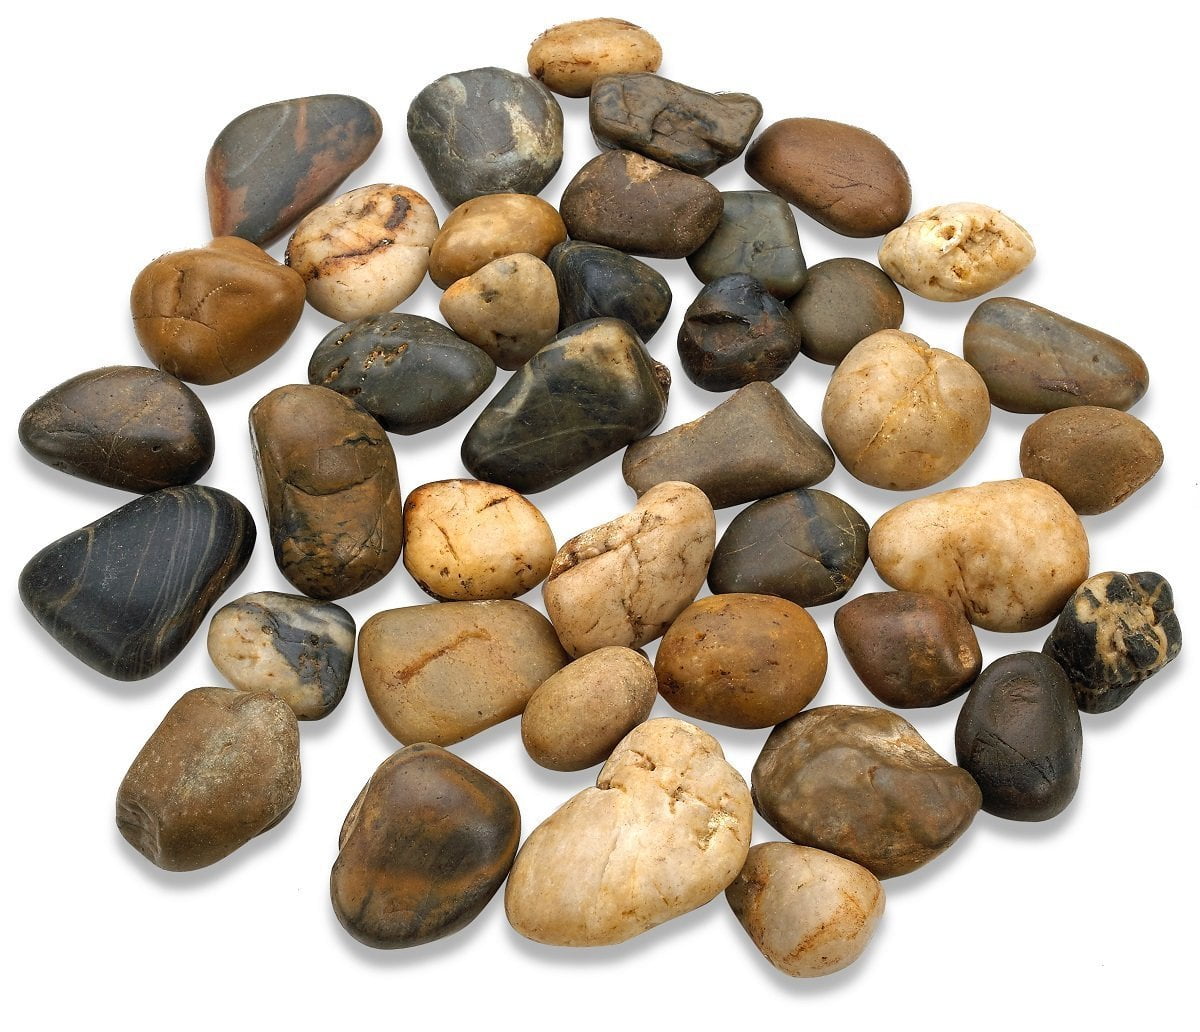 Katzco 2 Pounds Large Decorative River Rock Stones - Natural Polished Mixed Color Stones - Use in Glassware, Like Vases, Aquariums and Terrariums to